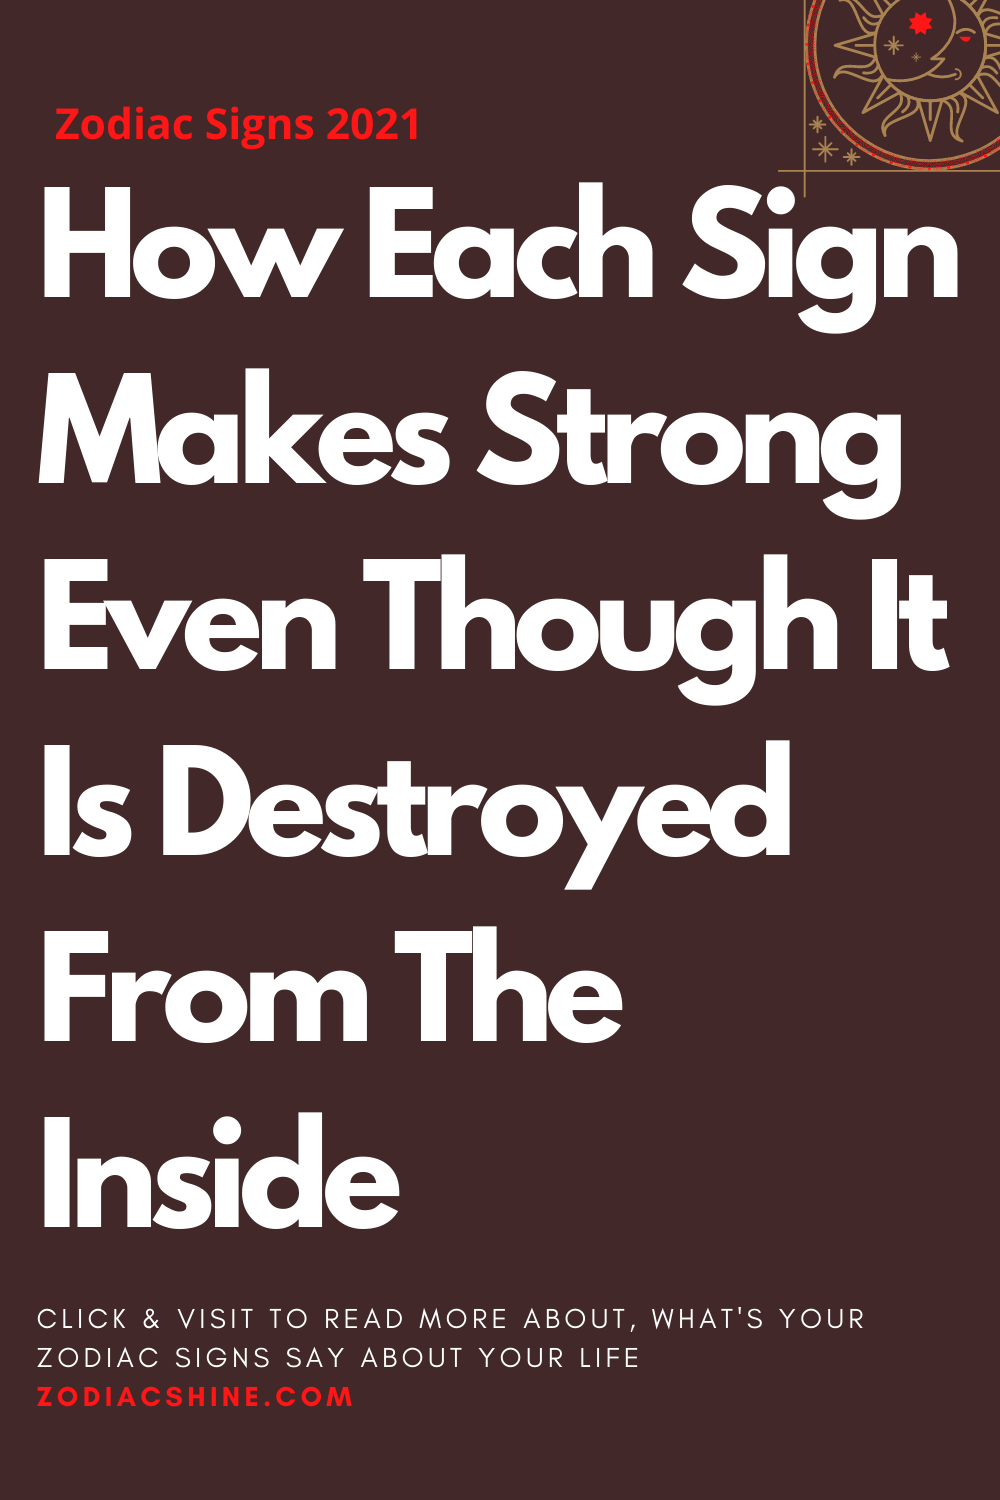 How Each Sign Makes Strong Even Though It Is Destroyed From The Inside